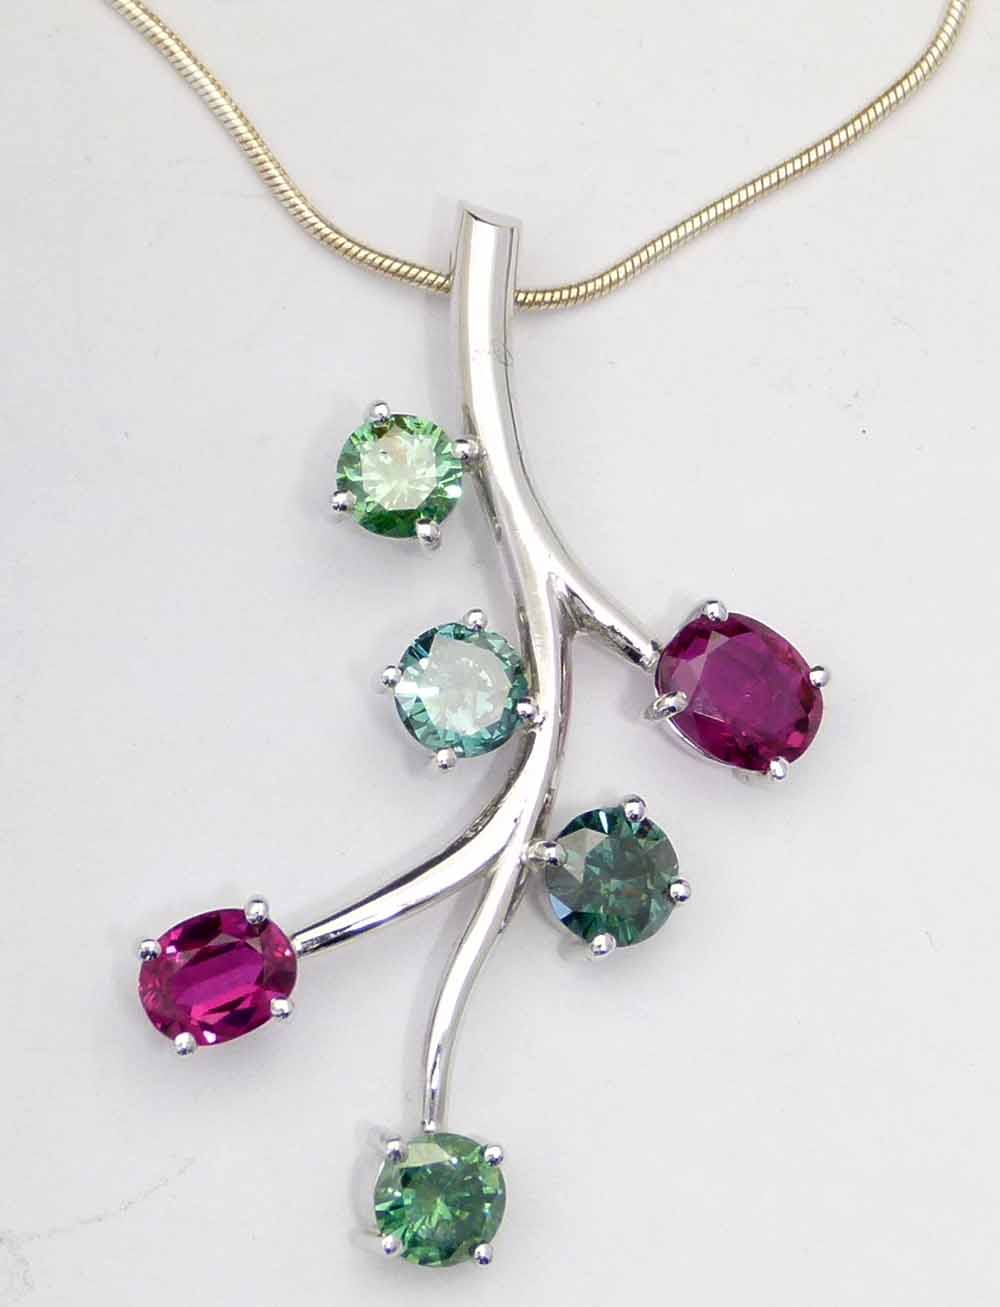 Ruby and green diamond (irradiated) floral spray pendant of unmarked white gold, length 45mm, on